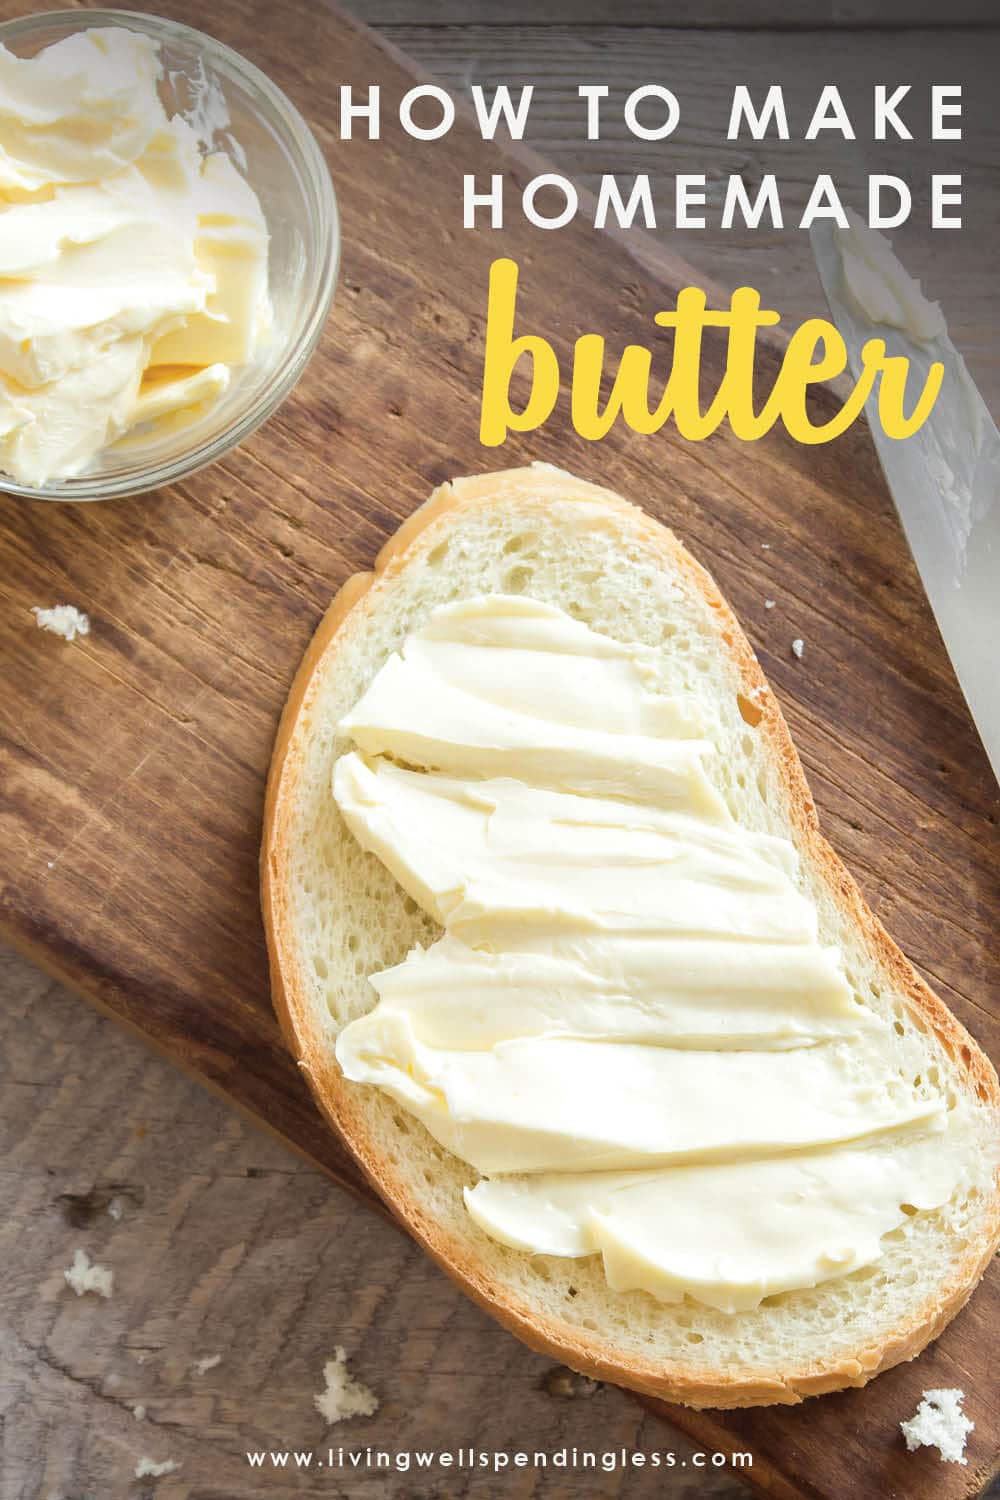 Did you know you can make your own homemade butter in a KitchenAid mixer or food processor?!! It is fun & easy and tastes SO much better than the store bought stuff!